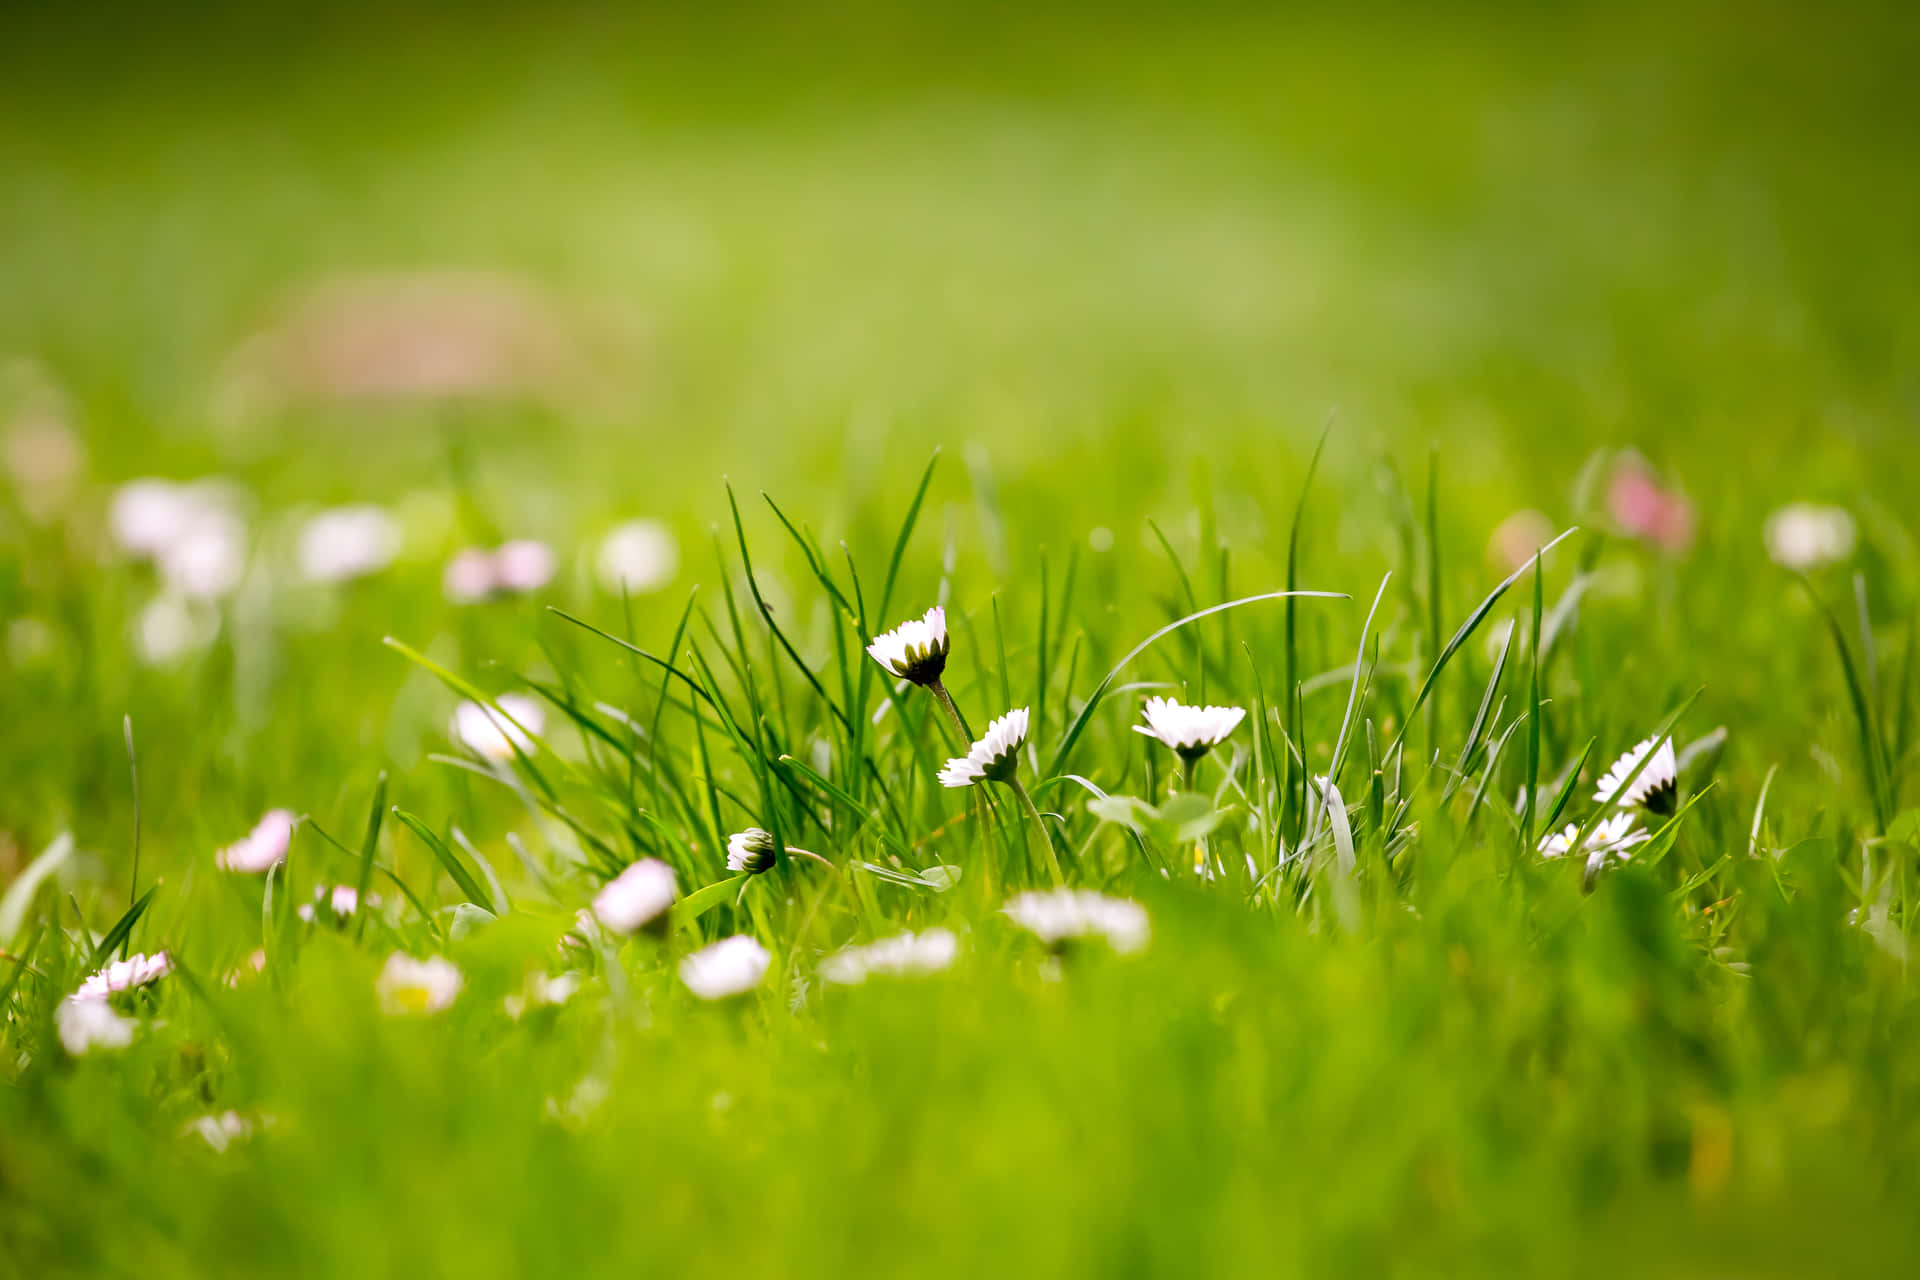 A Green Field With White Flowers